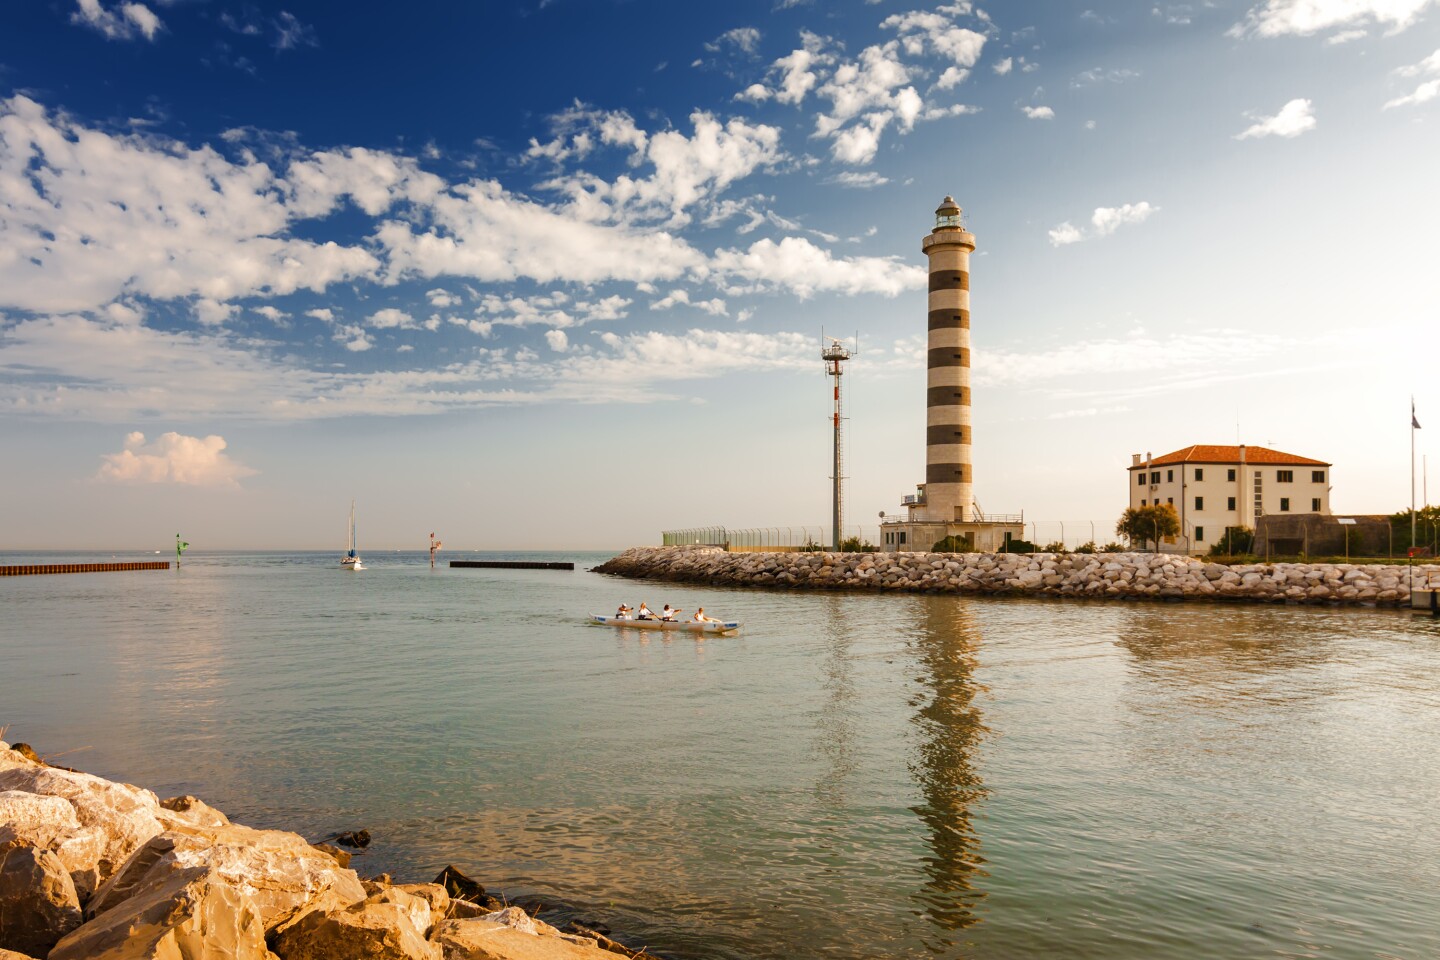 Take a vaporetto (or water bus) to one of Venice's 100+ islands for a calmer experience.